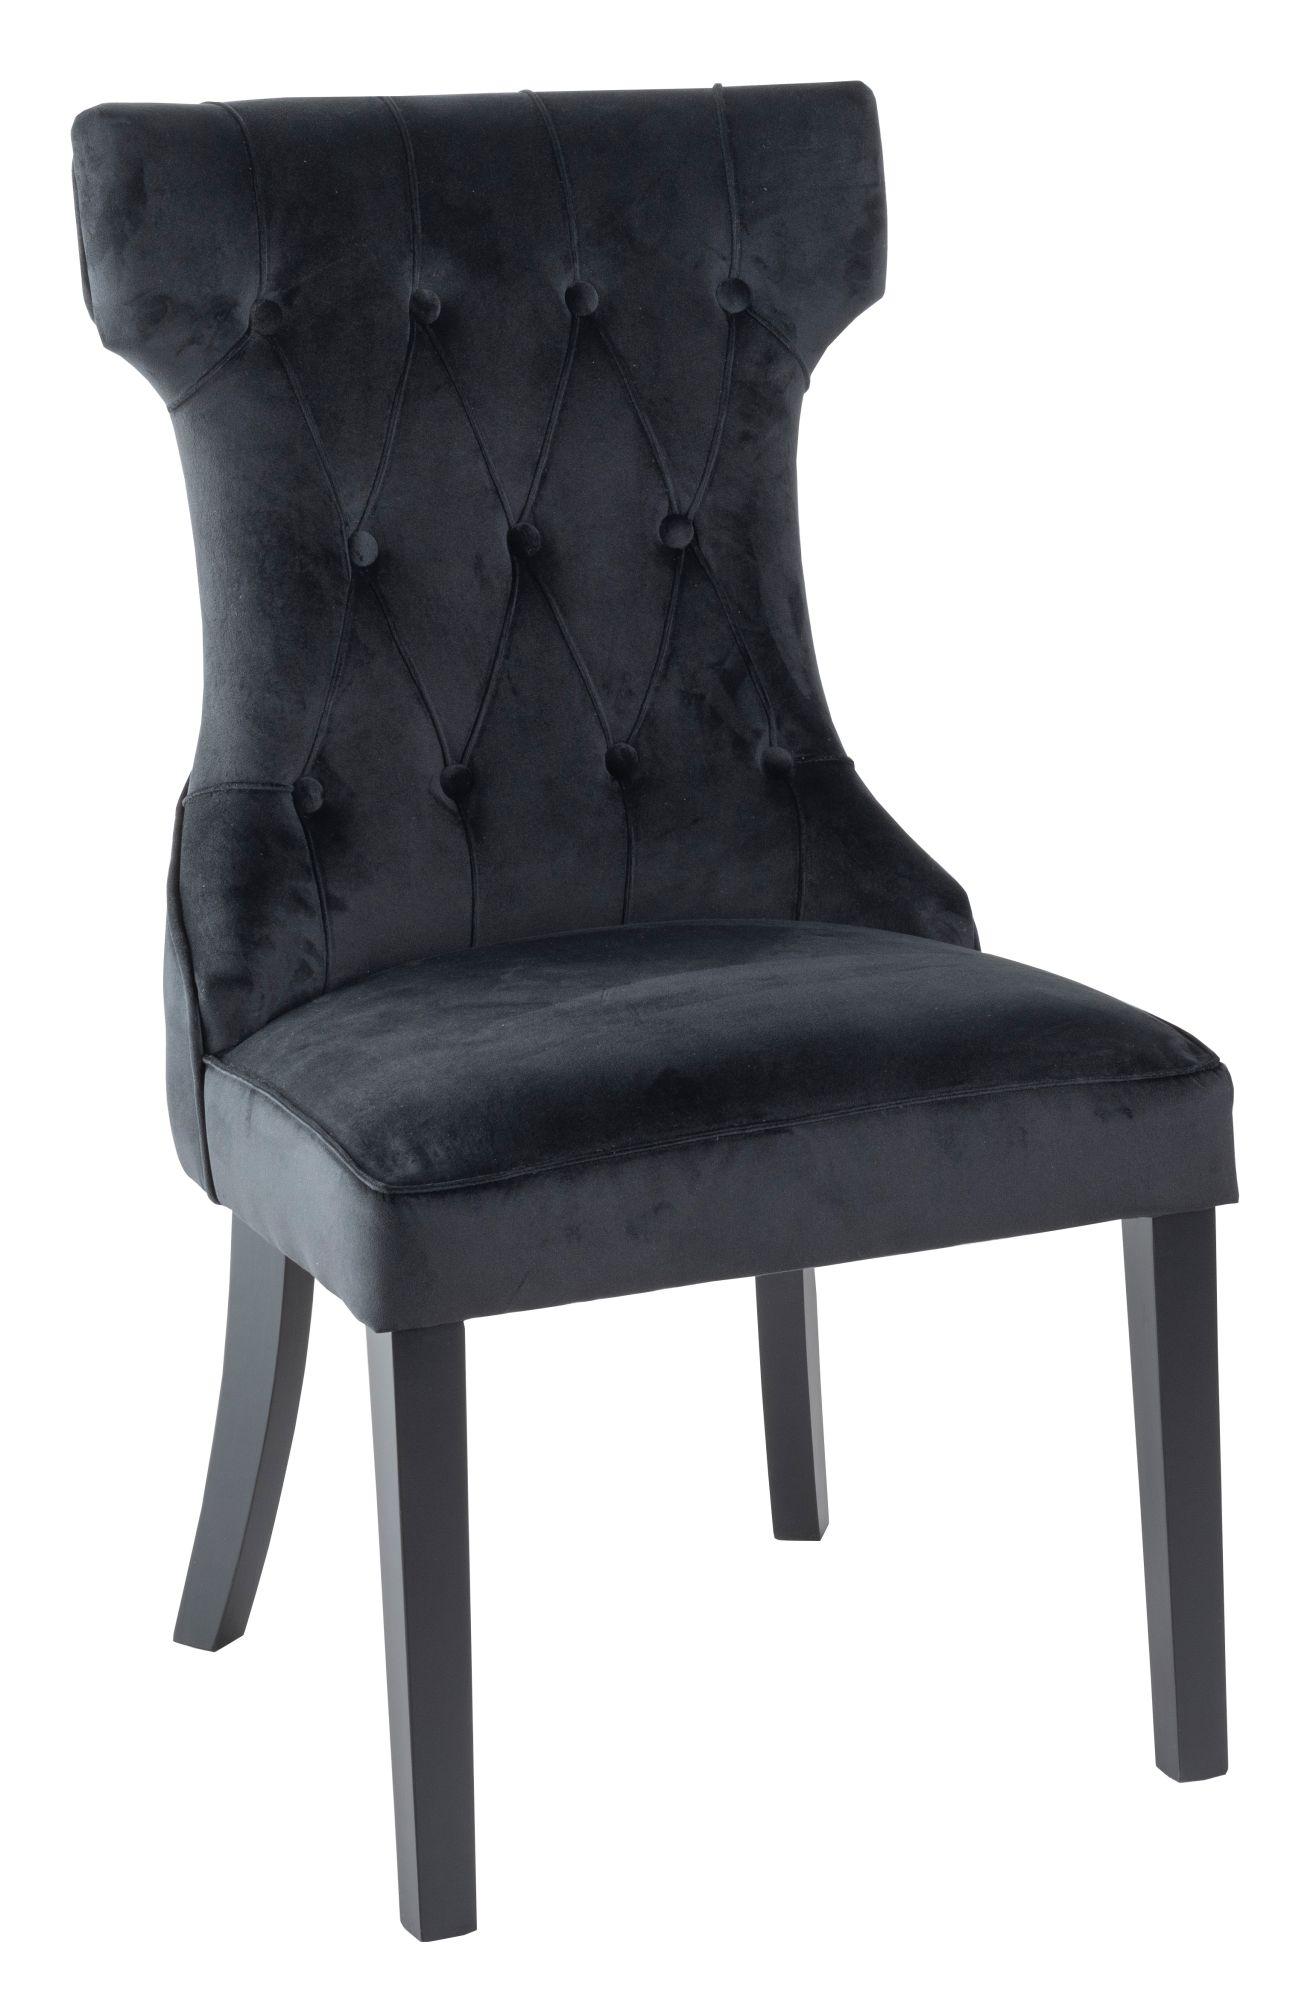 Courtney Black Dining Chair, Tufted Velvet Fabric Upholstered with Black Wooden Legs